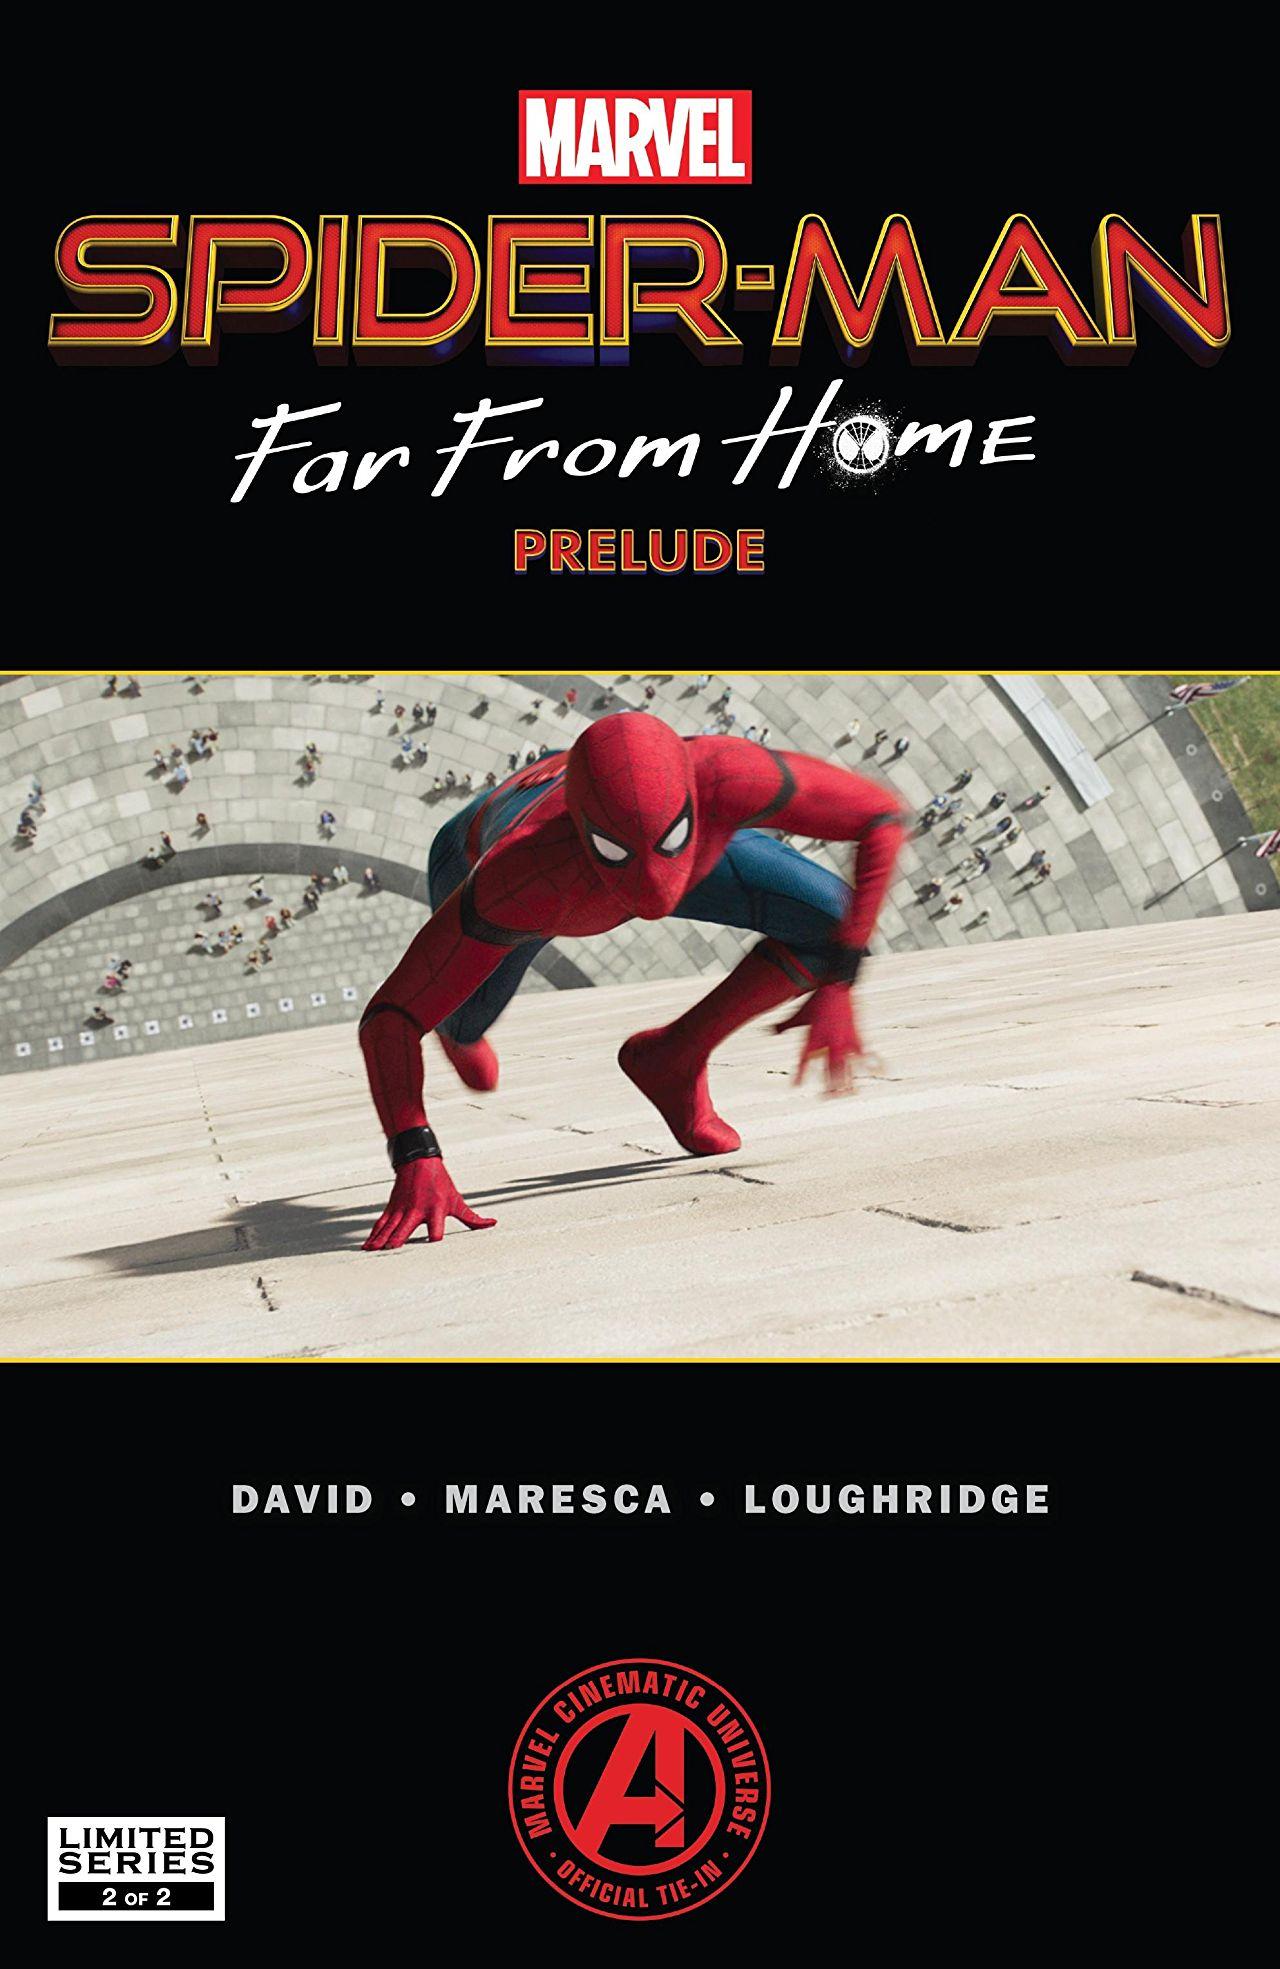 Marvel's Spider-Man: Far From Home Prelude Vol. 1 #2